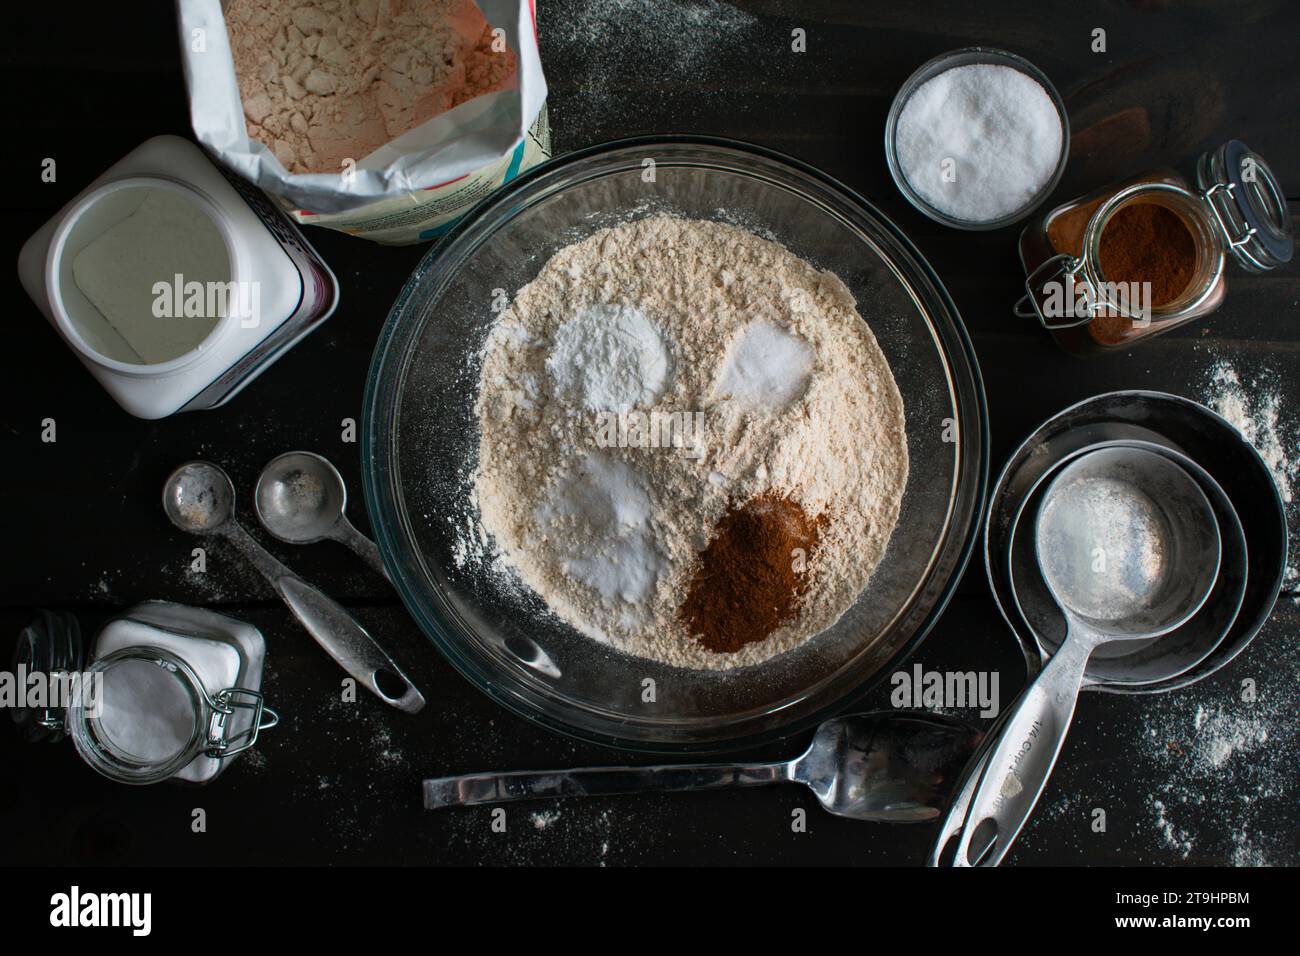 Mixing Dry Ingredients for Baked Apple Cider Donuts: Whole-wheat pastry flour in a glass mixing bowl surrounded by kitchen tools and ingredients Stock Photo